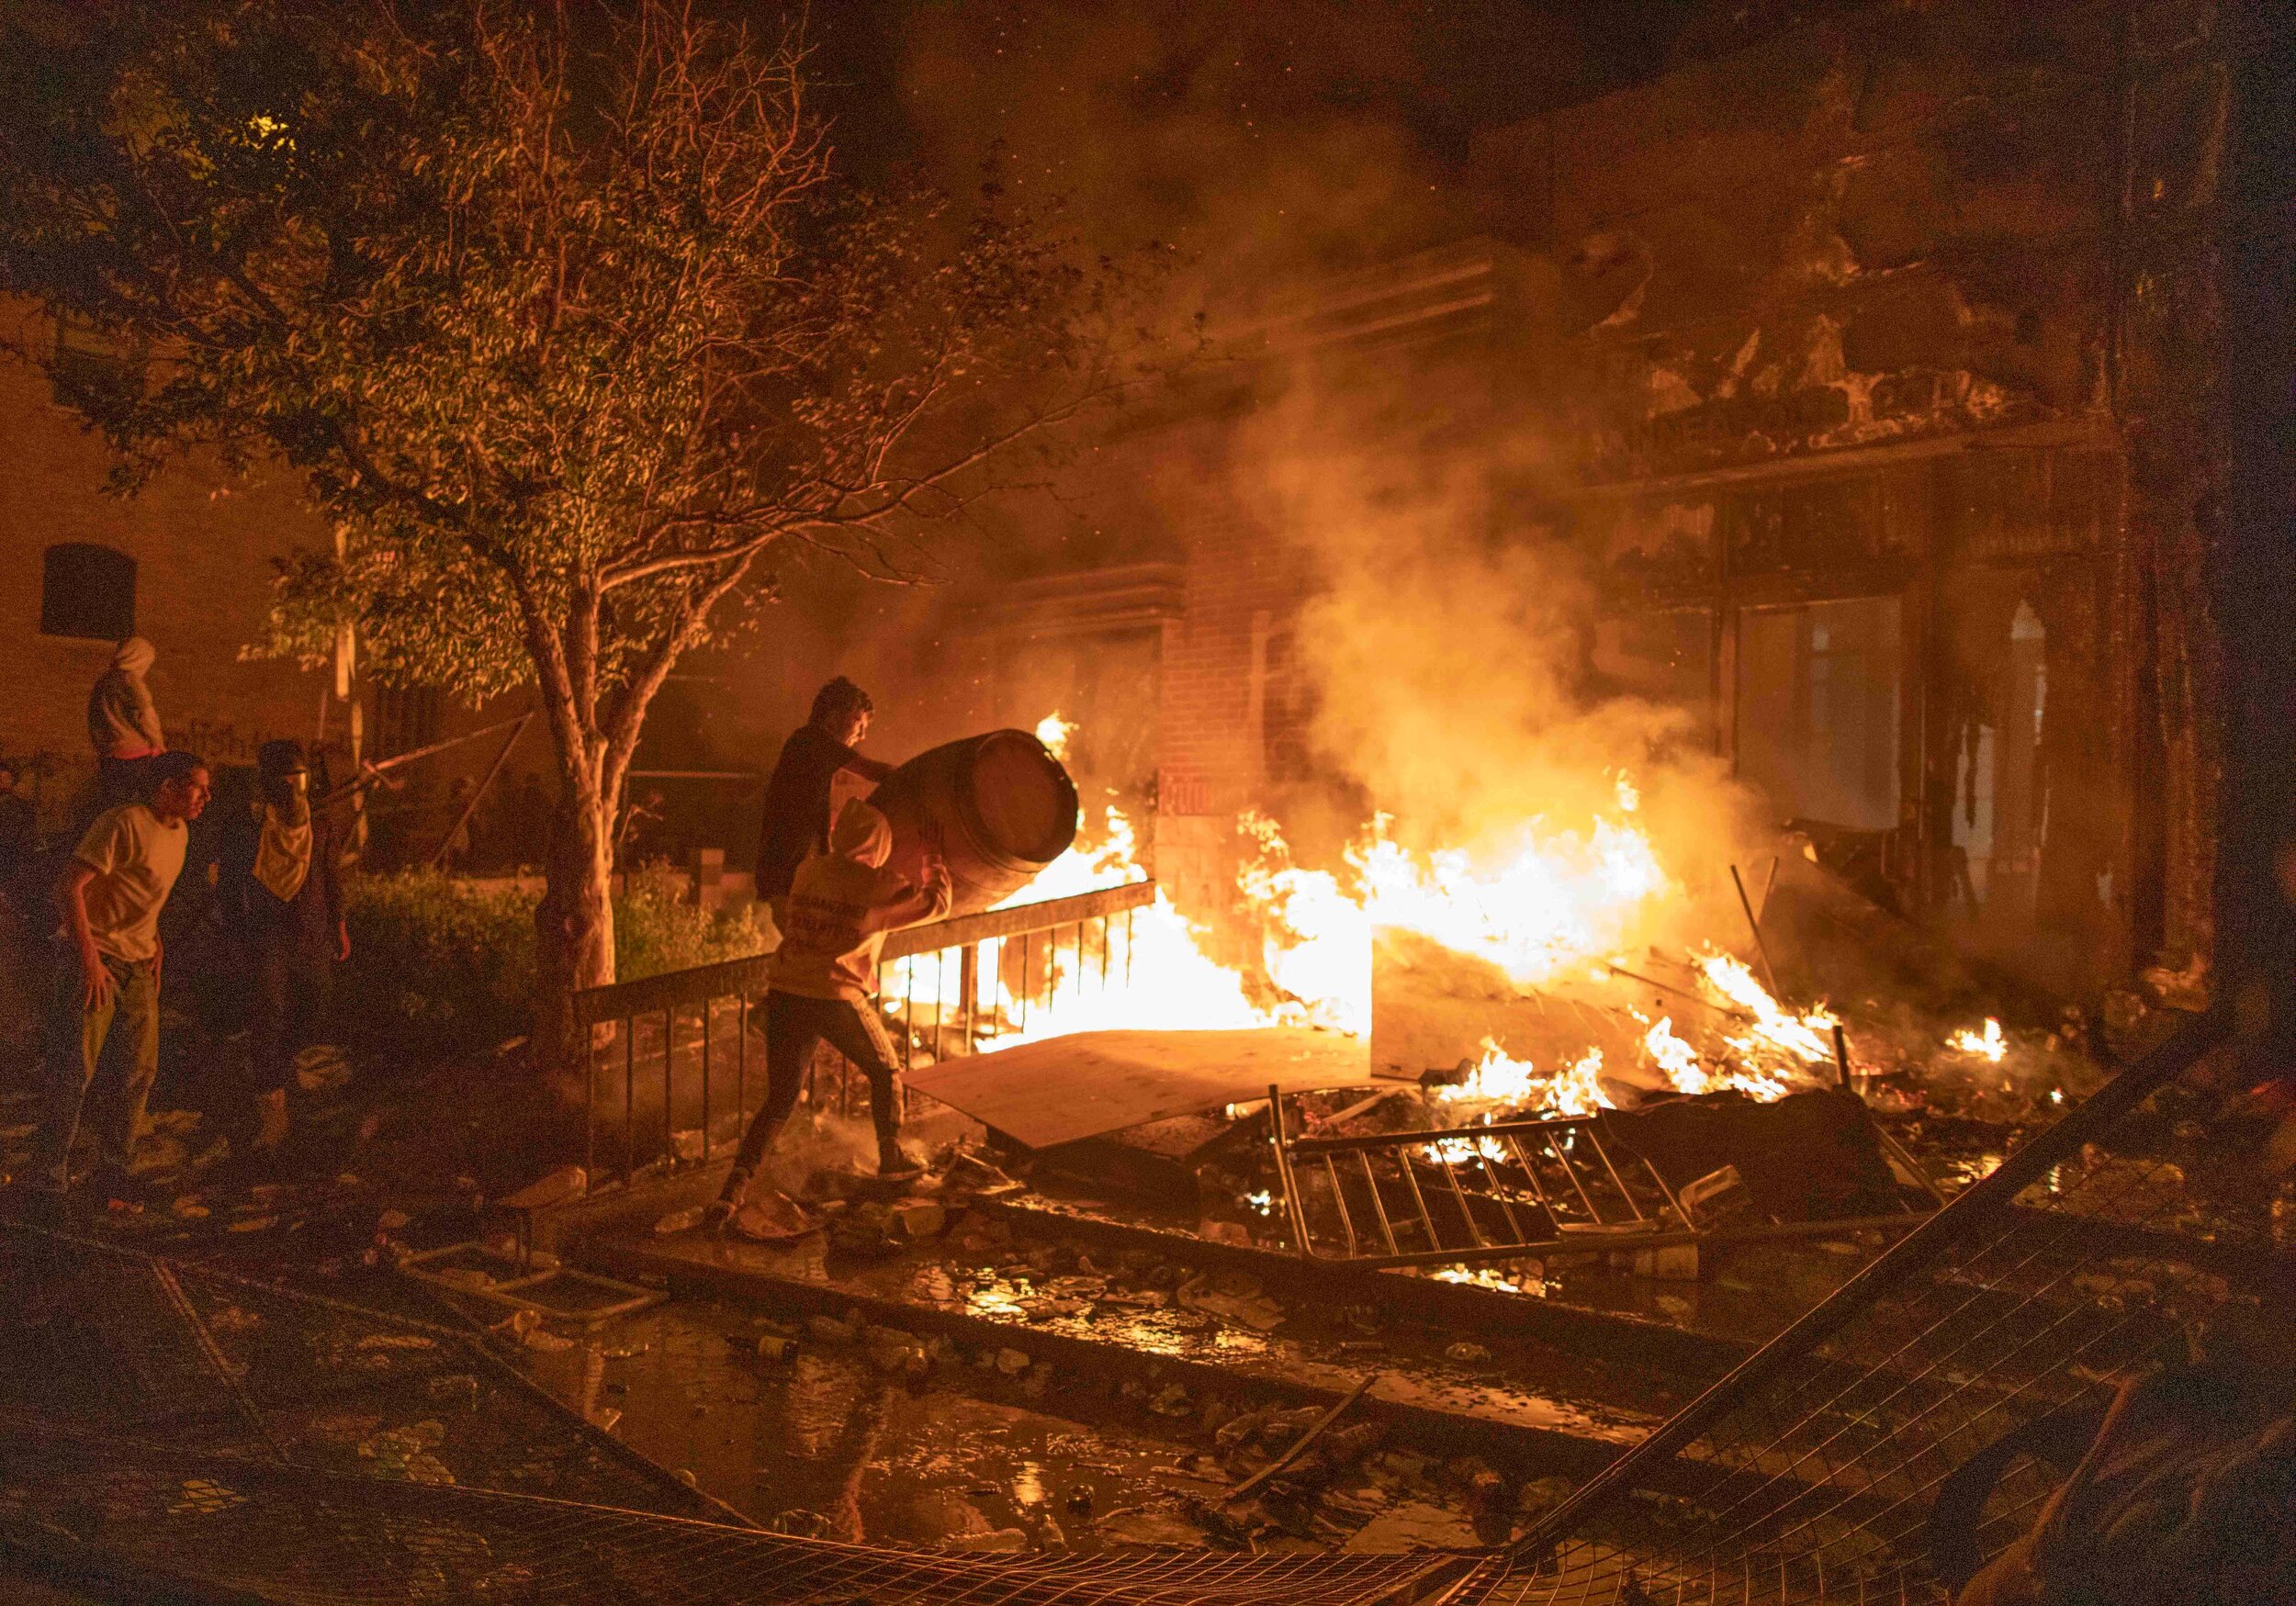  Protesters move a wooden cask together into a fire in an attempt to burn down the Minneapolis 3rd police precinct after riots broke out all over the Twin Cities over the police killing of George Floyd on May 28, 2020. 